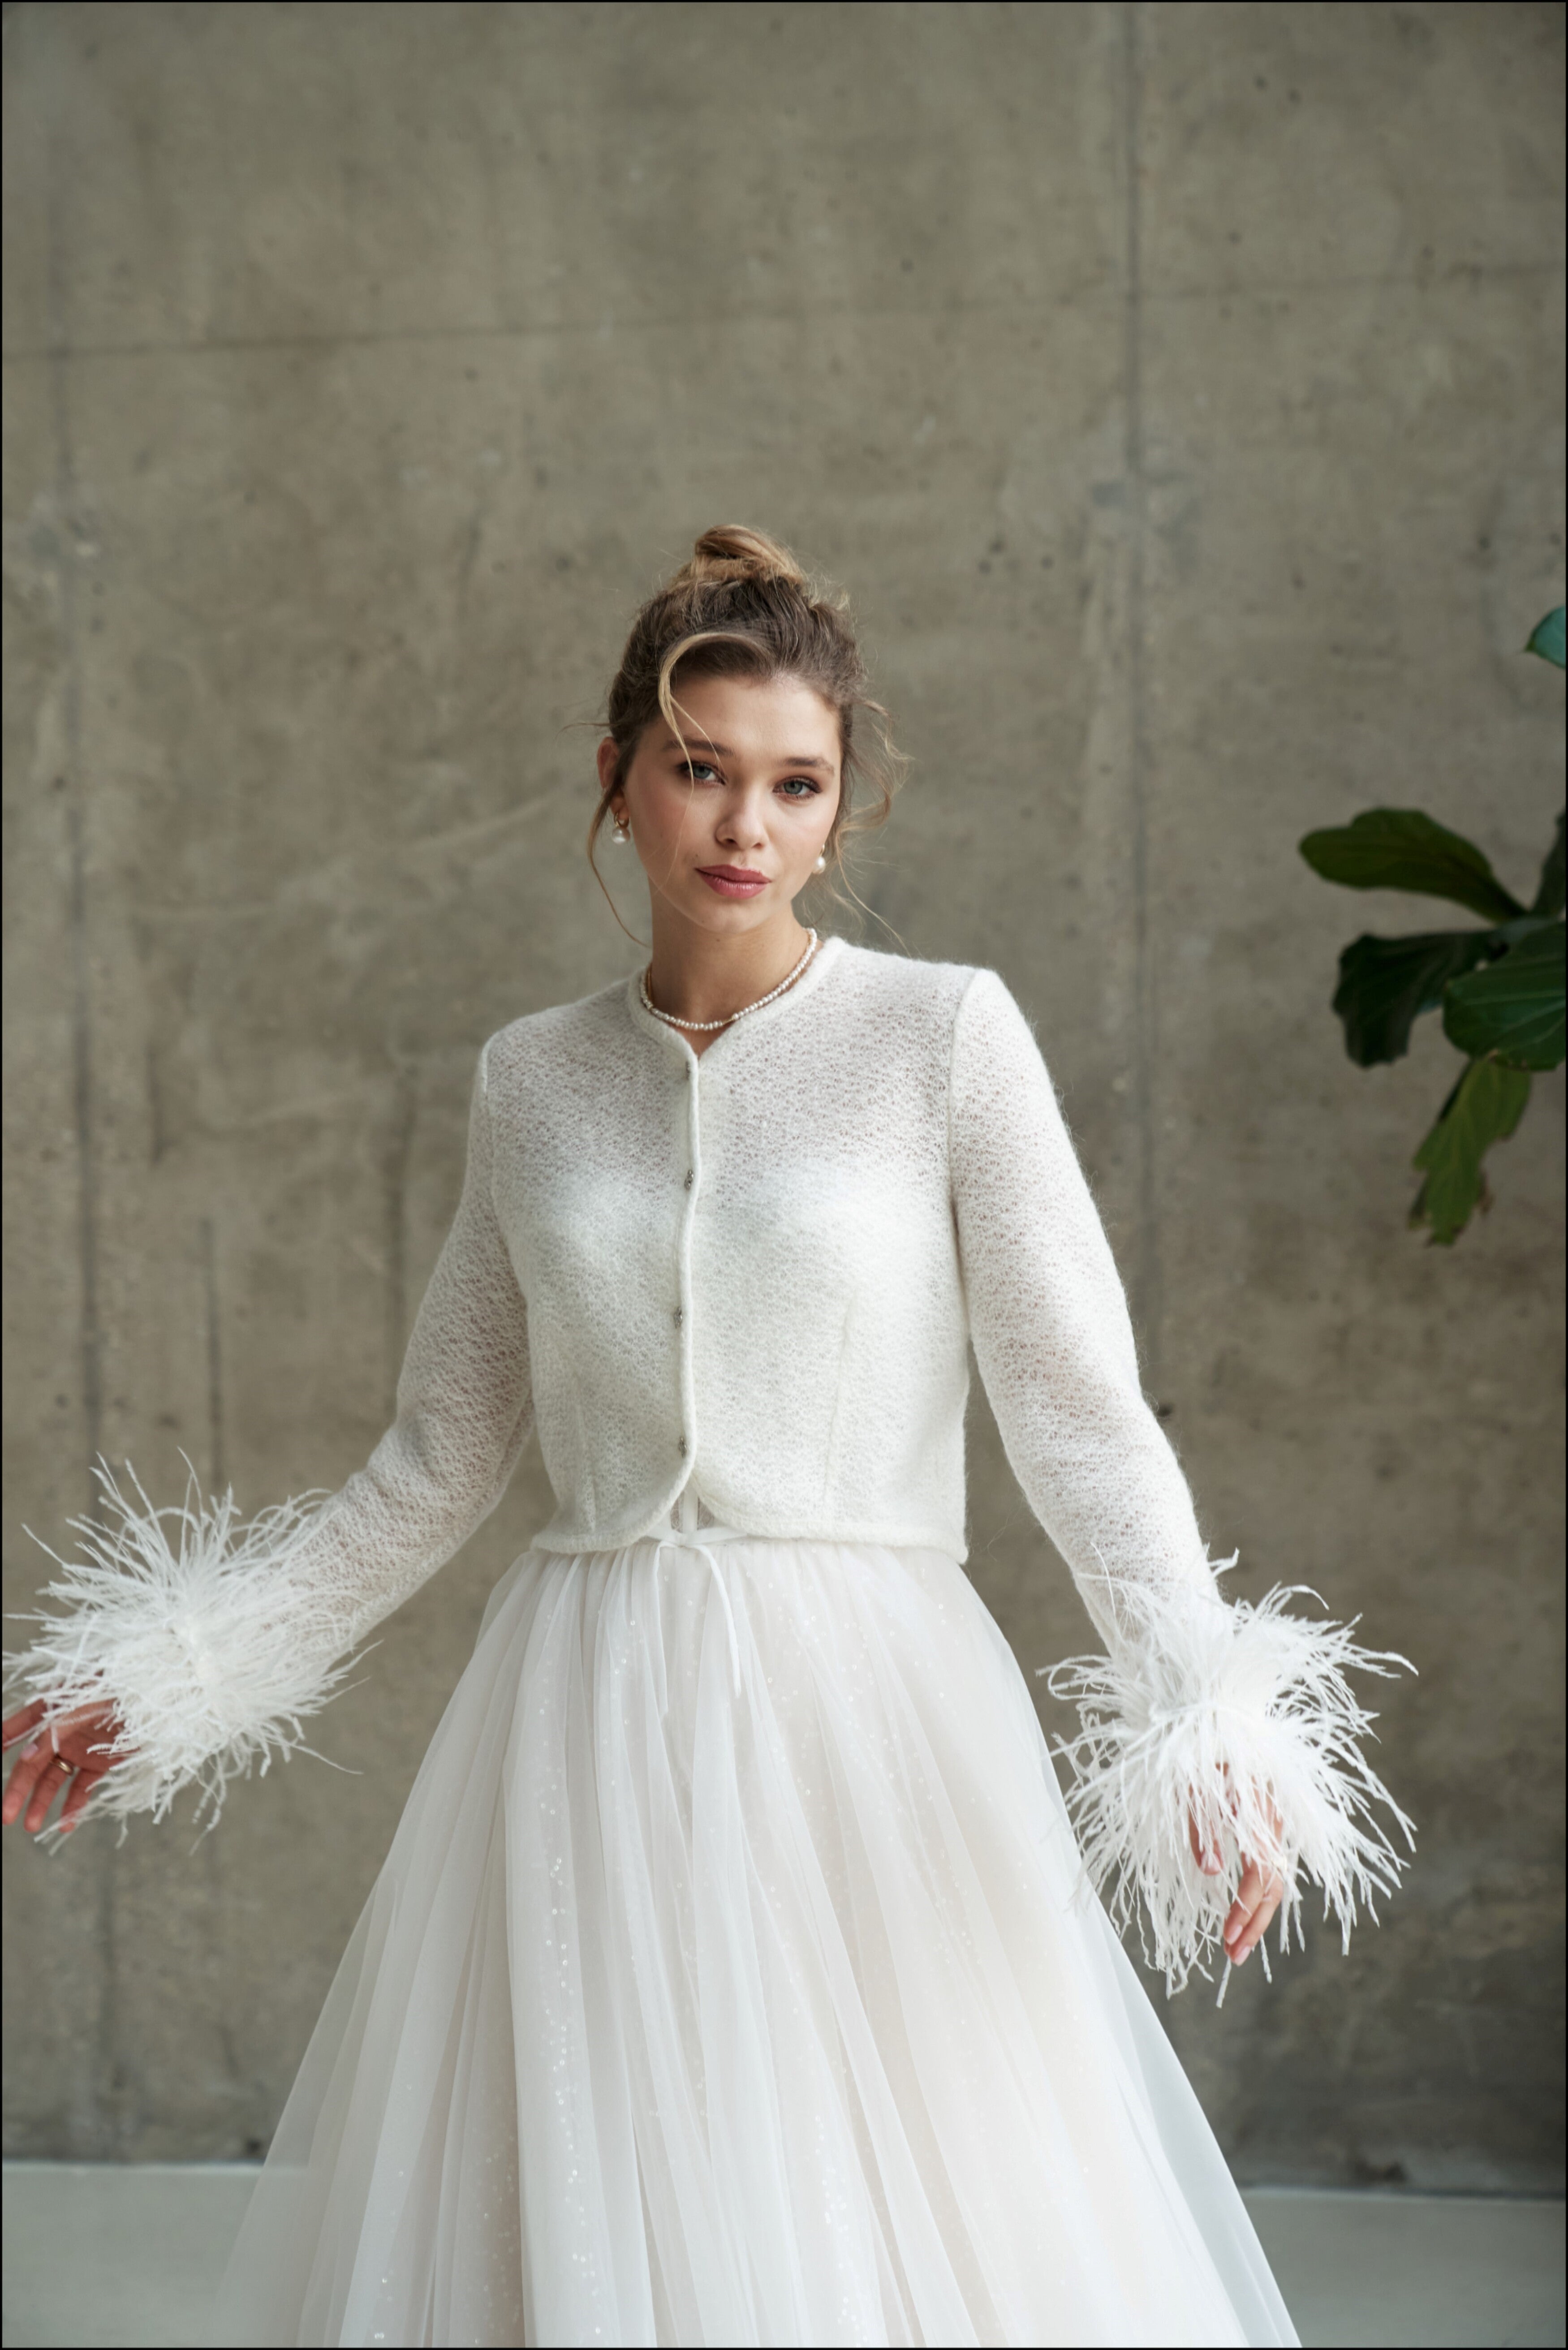 Bridal wedding jacket with feather cuffs. Wedding cardigan with feather decorated sleeves.